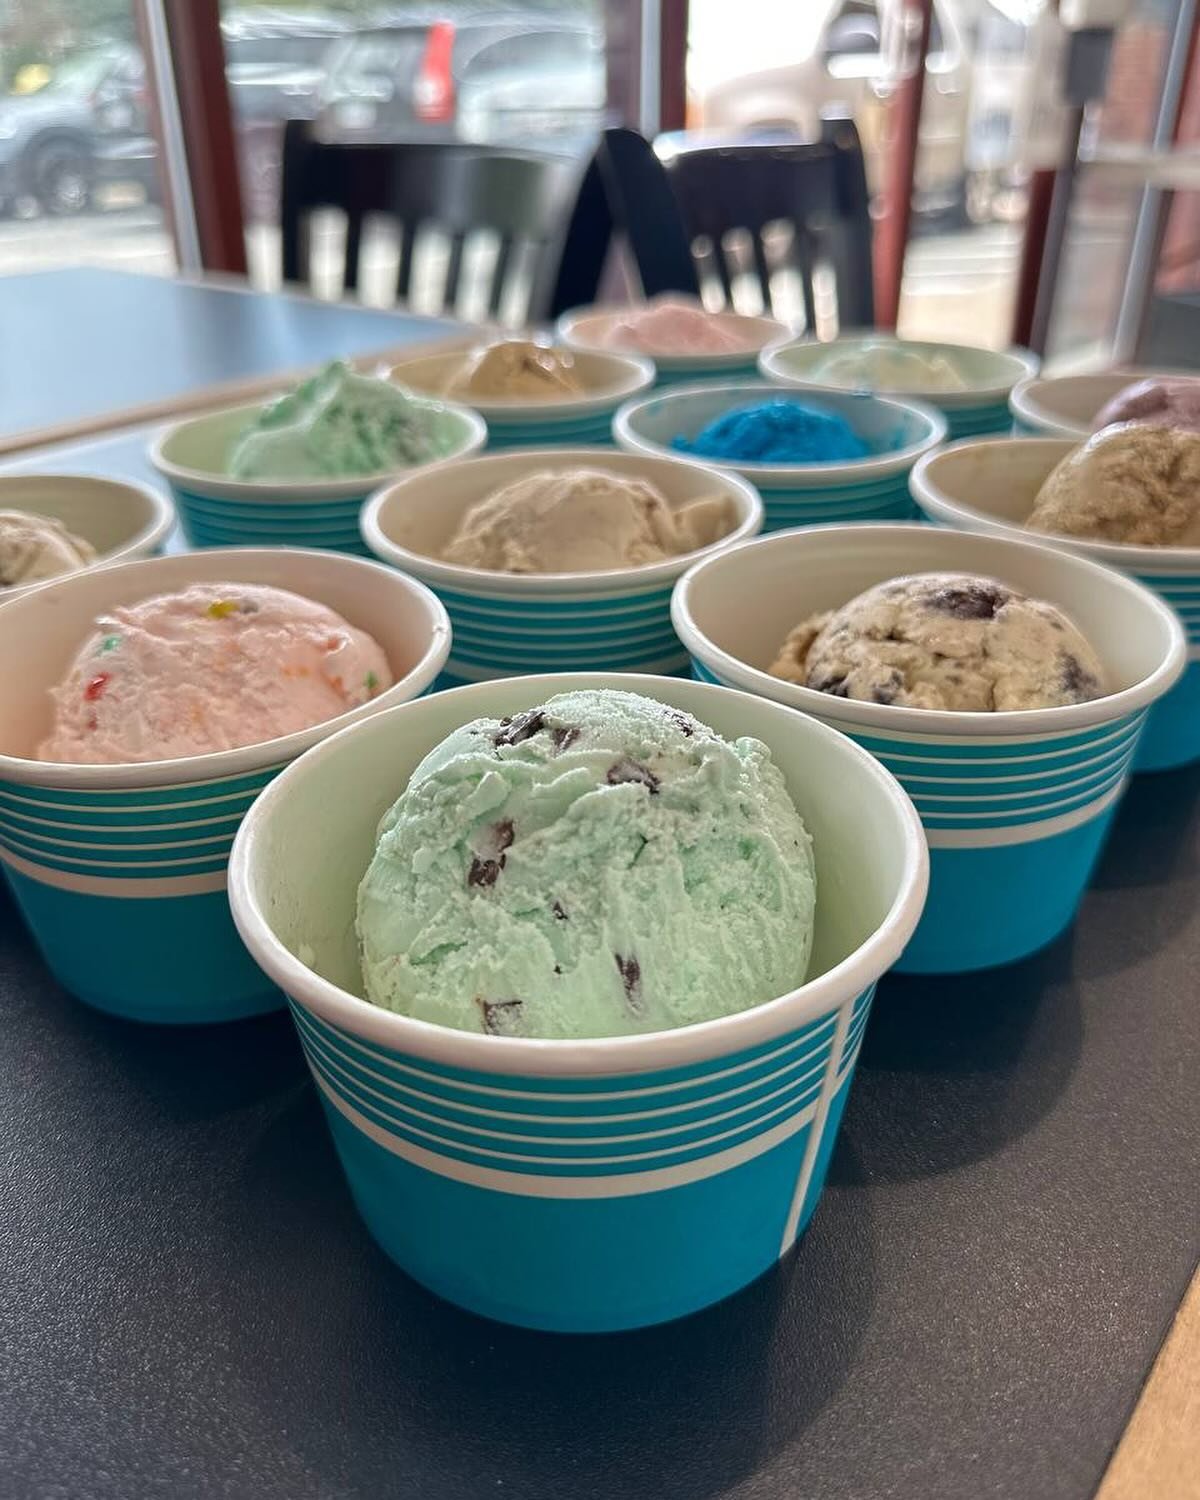 Rainy day special! Today, April 12, only, come into the store and say &ldquo;I love ice cream&rdquo; and get a double scoop for the price of a single! 

This ice cream is made by Gifford's Famous Ice Cream. 

#icecream #rainyday #besticecream #icecre